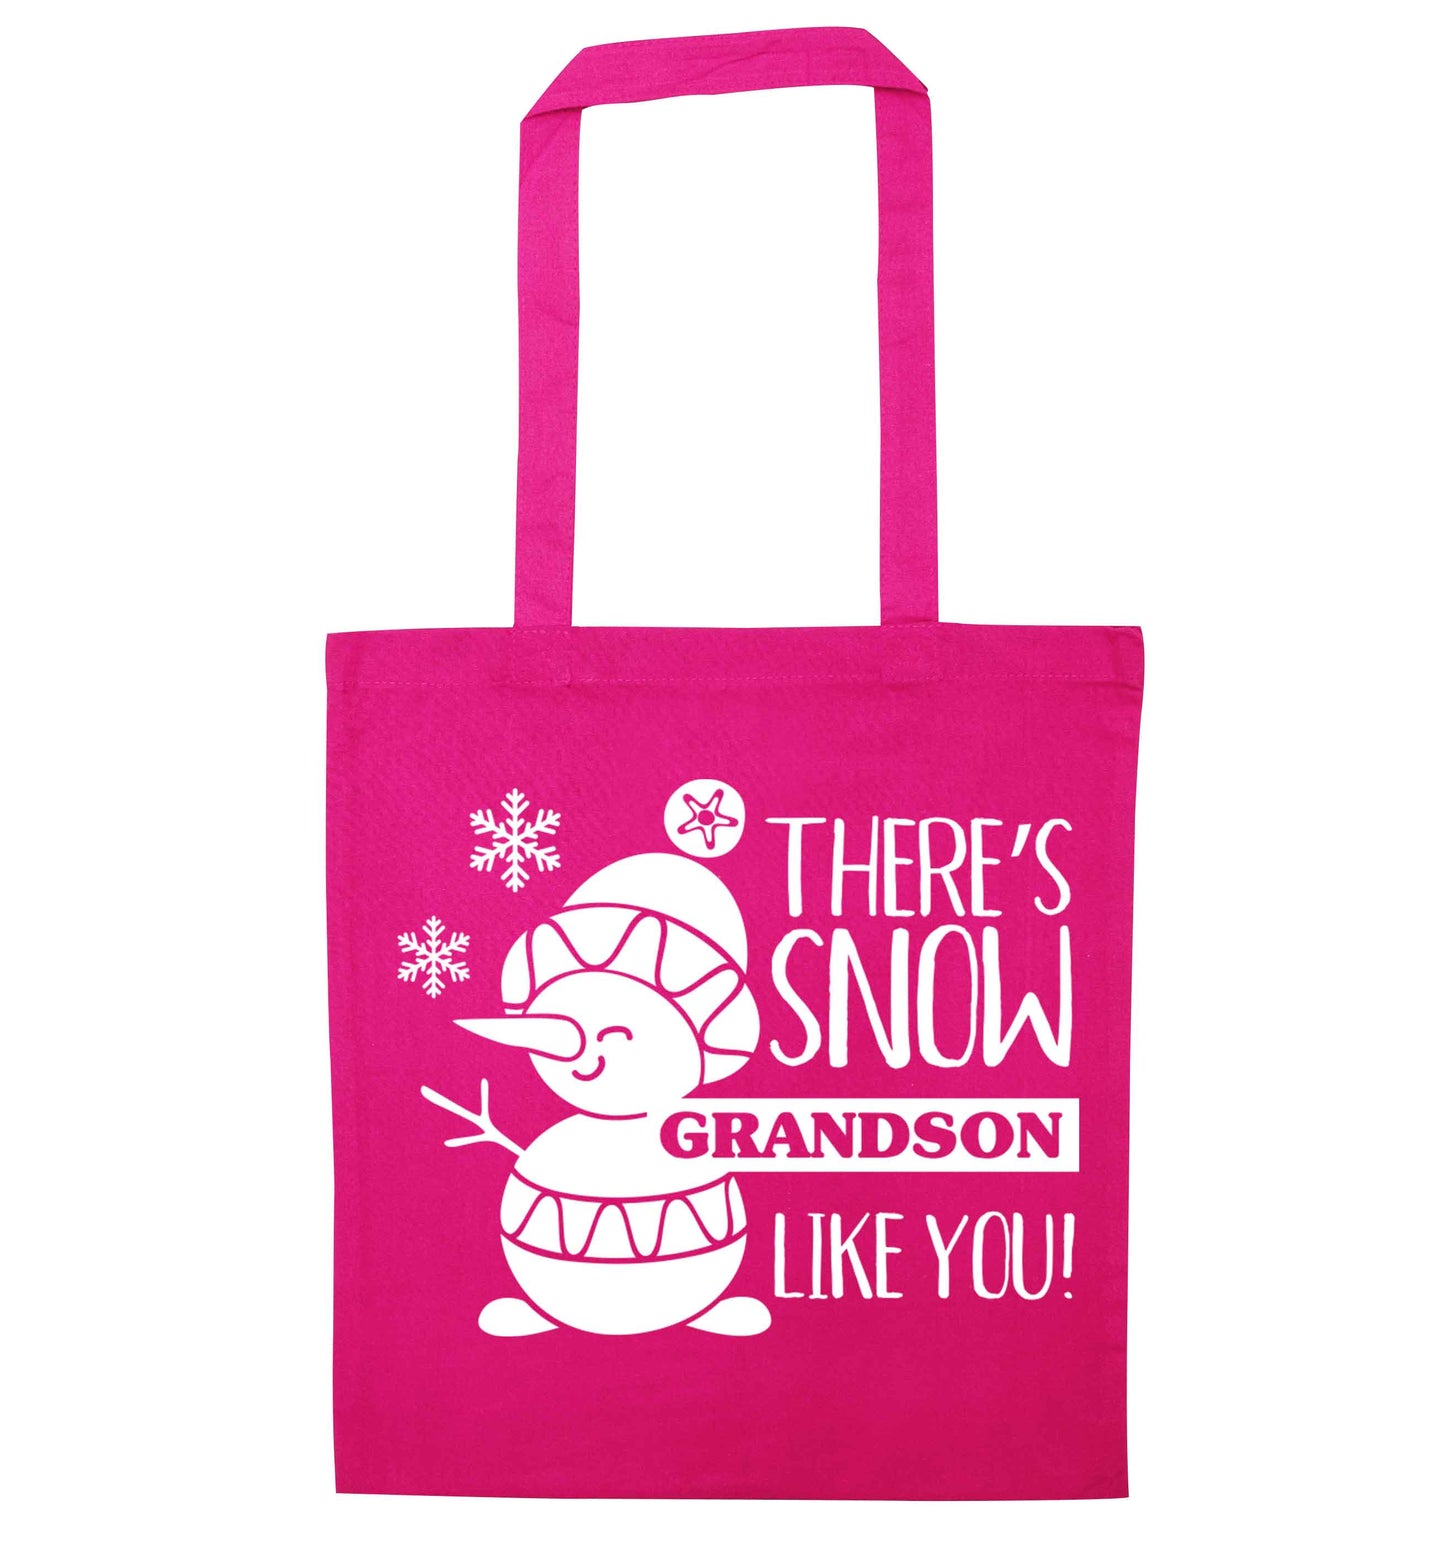 There's snow grandson like you pink tote bag